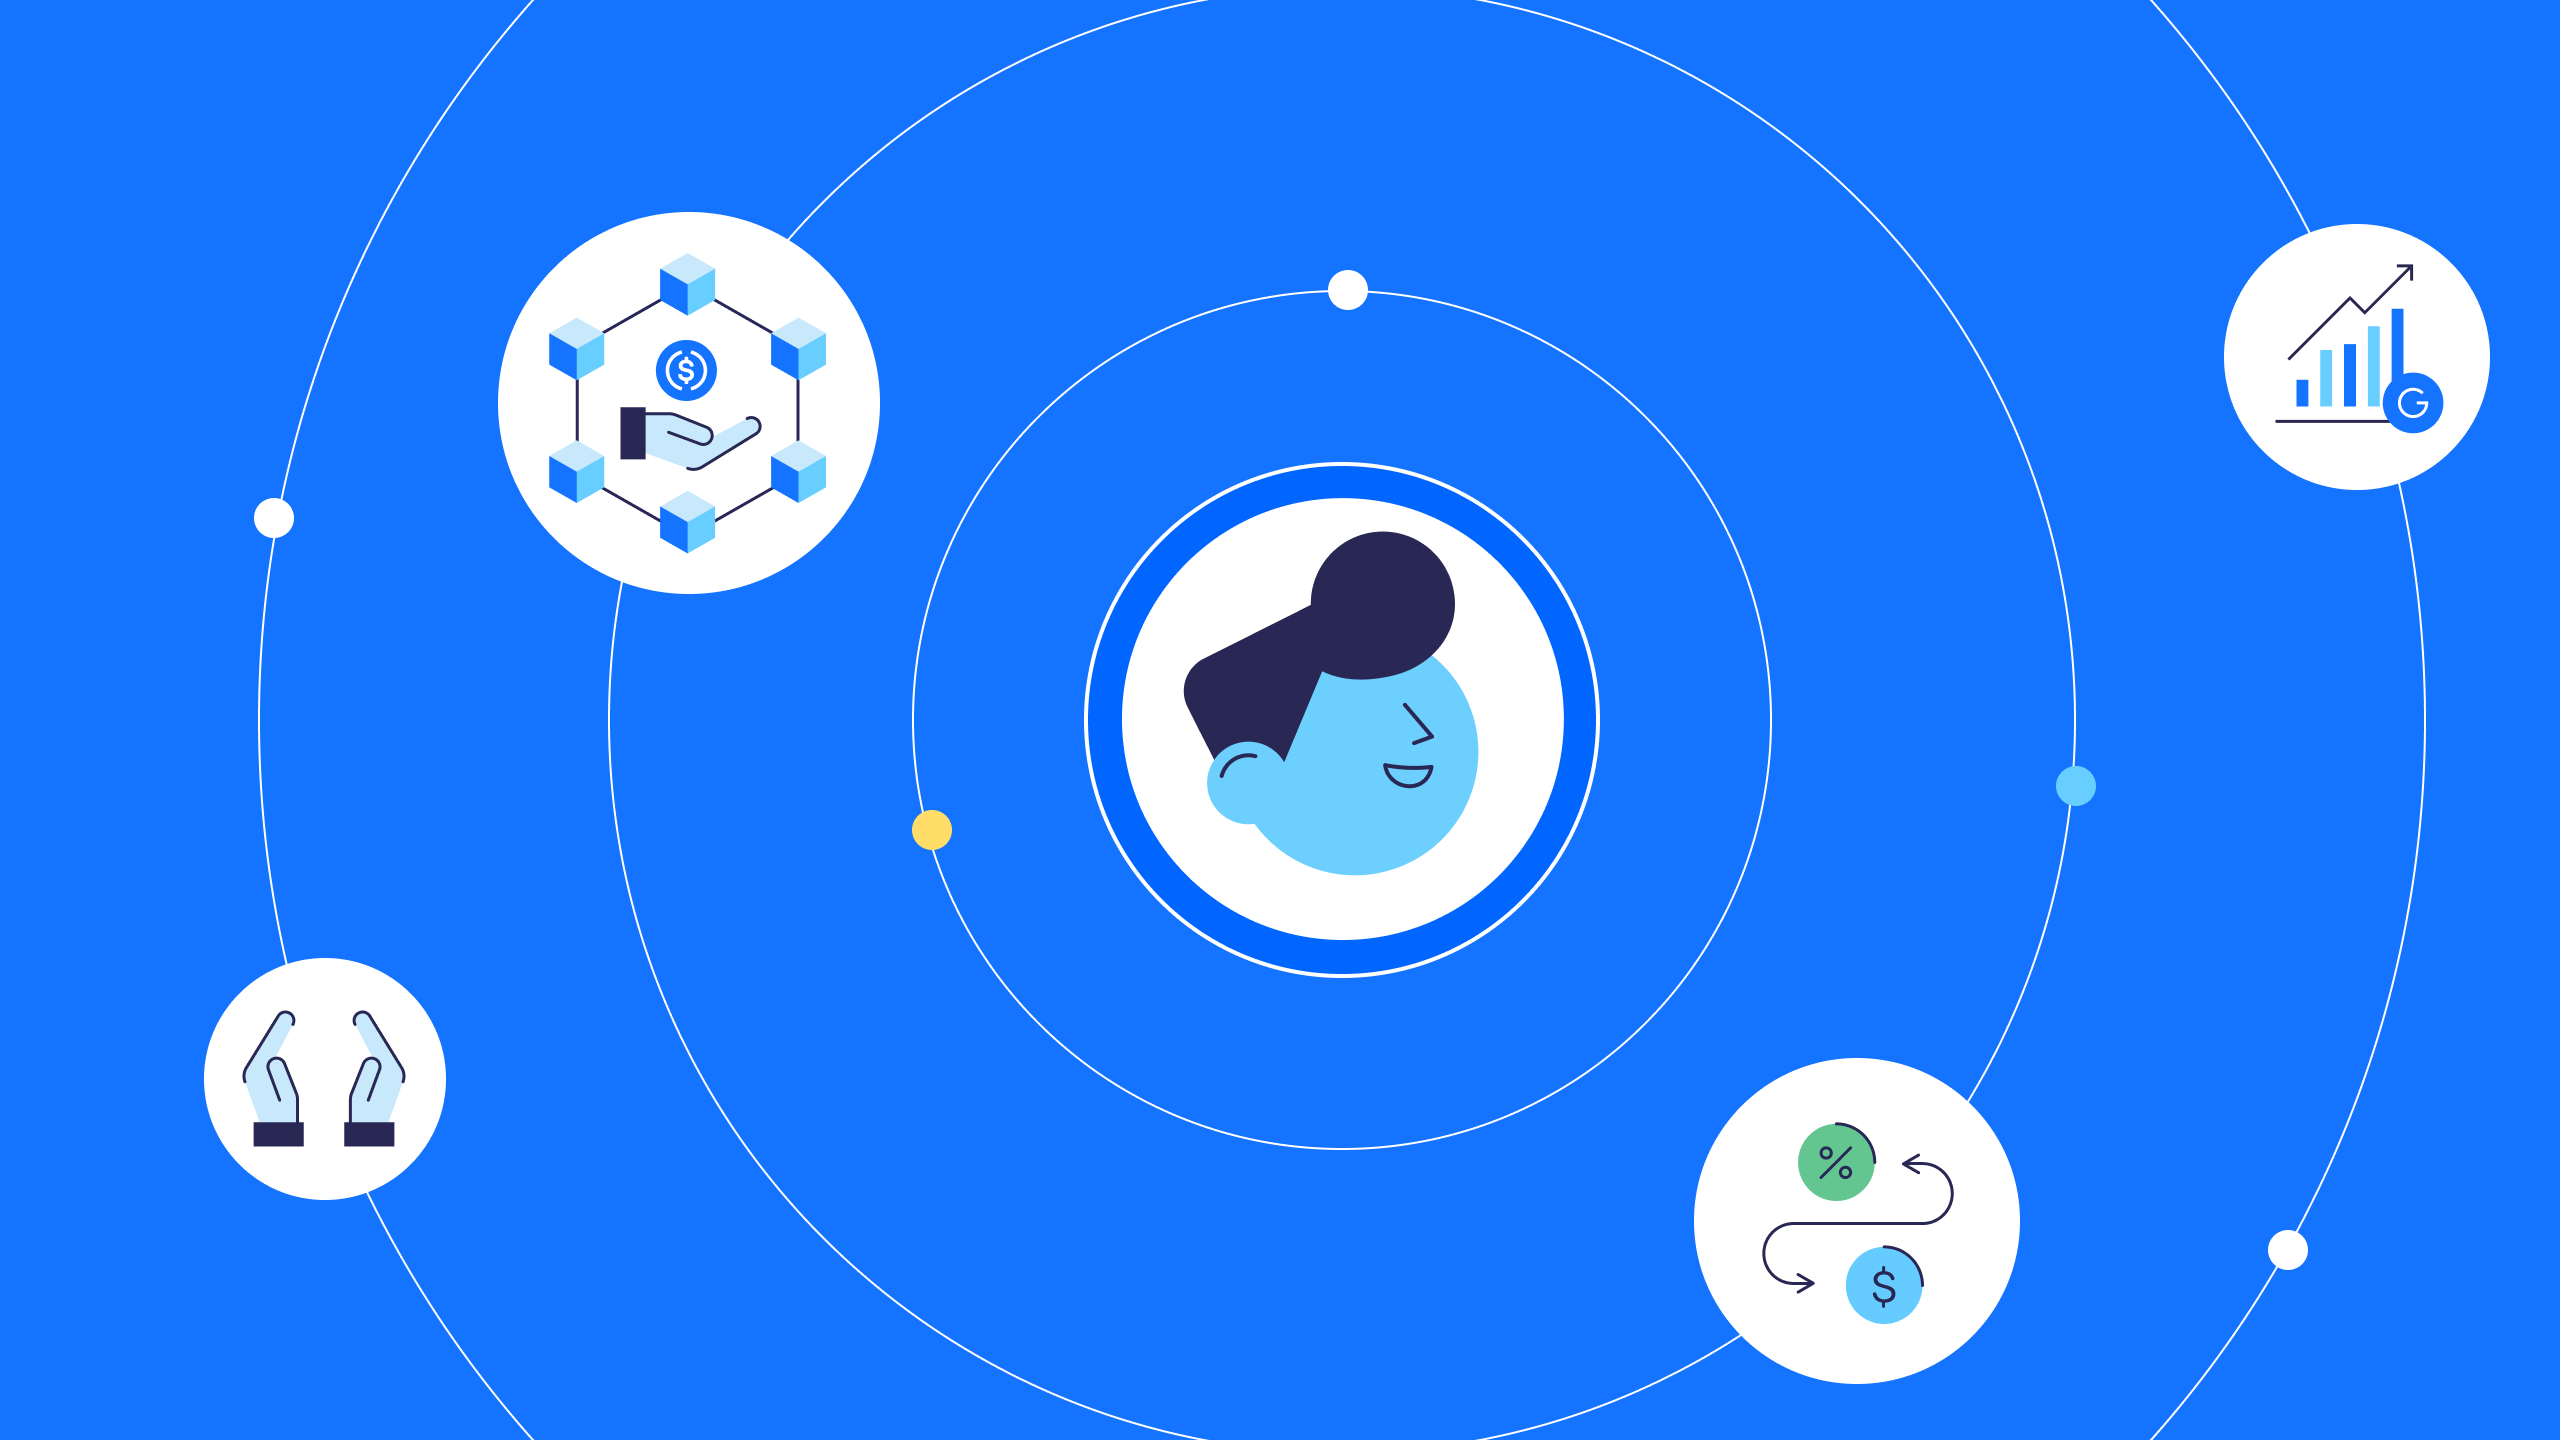 A Person visualizing all the defi projects and ecosystem